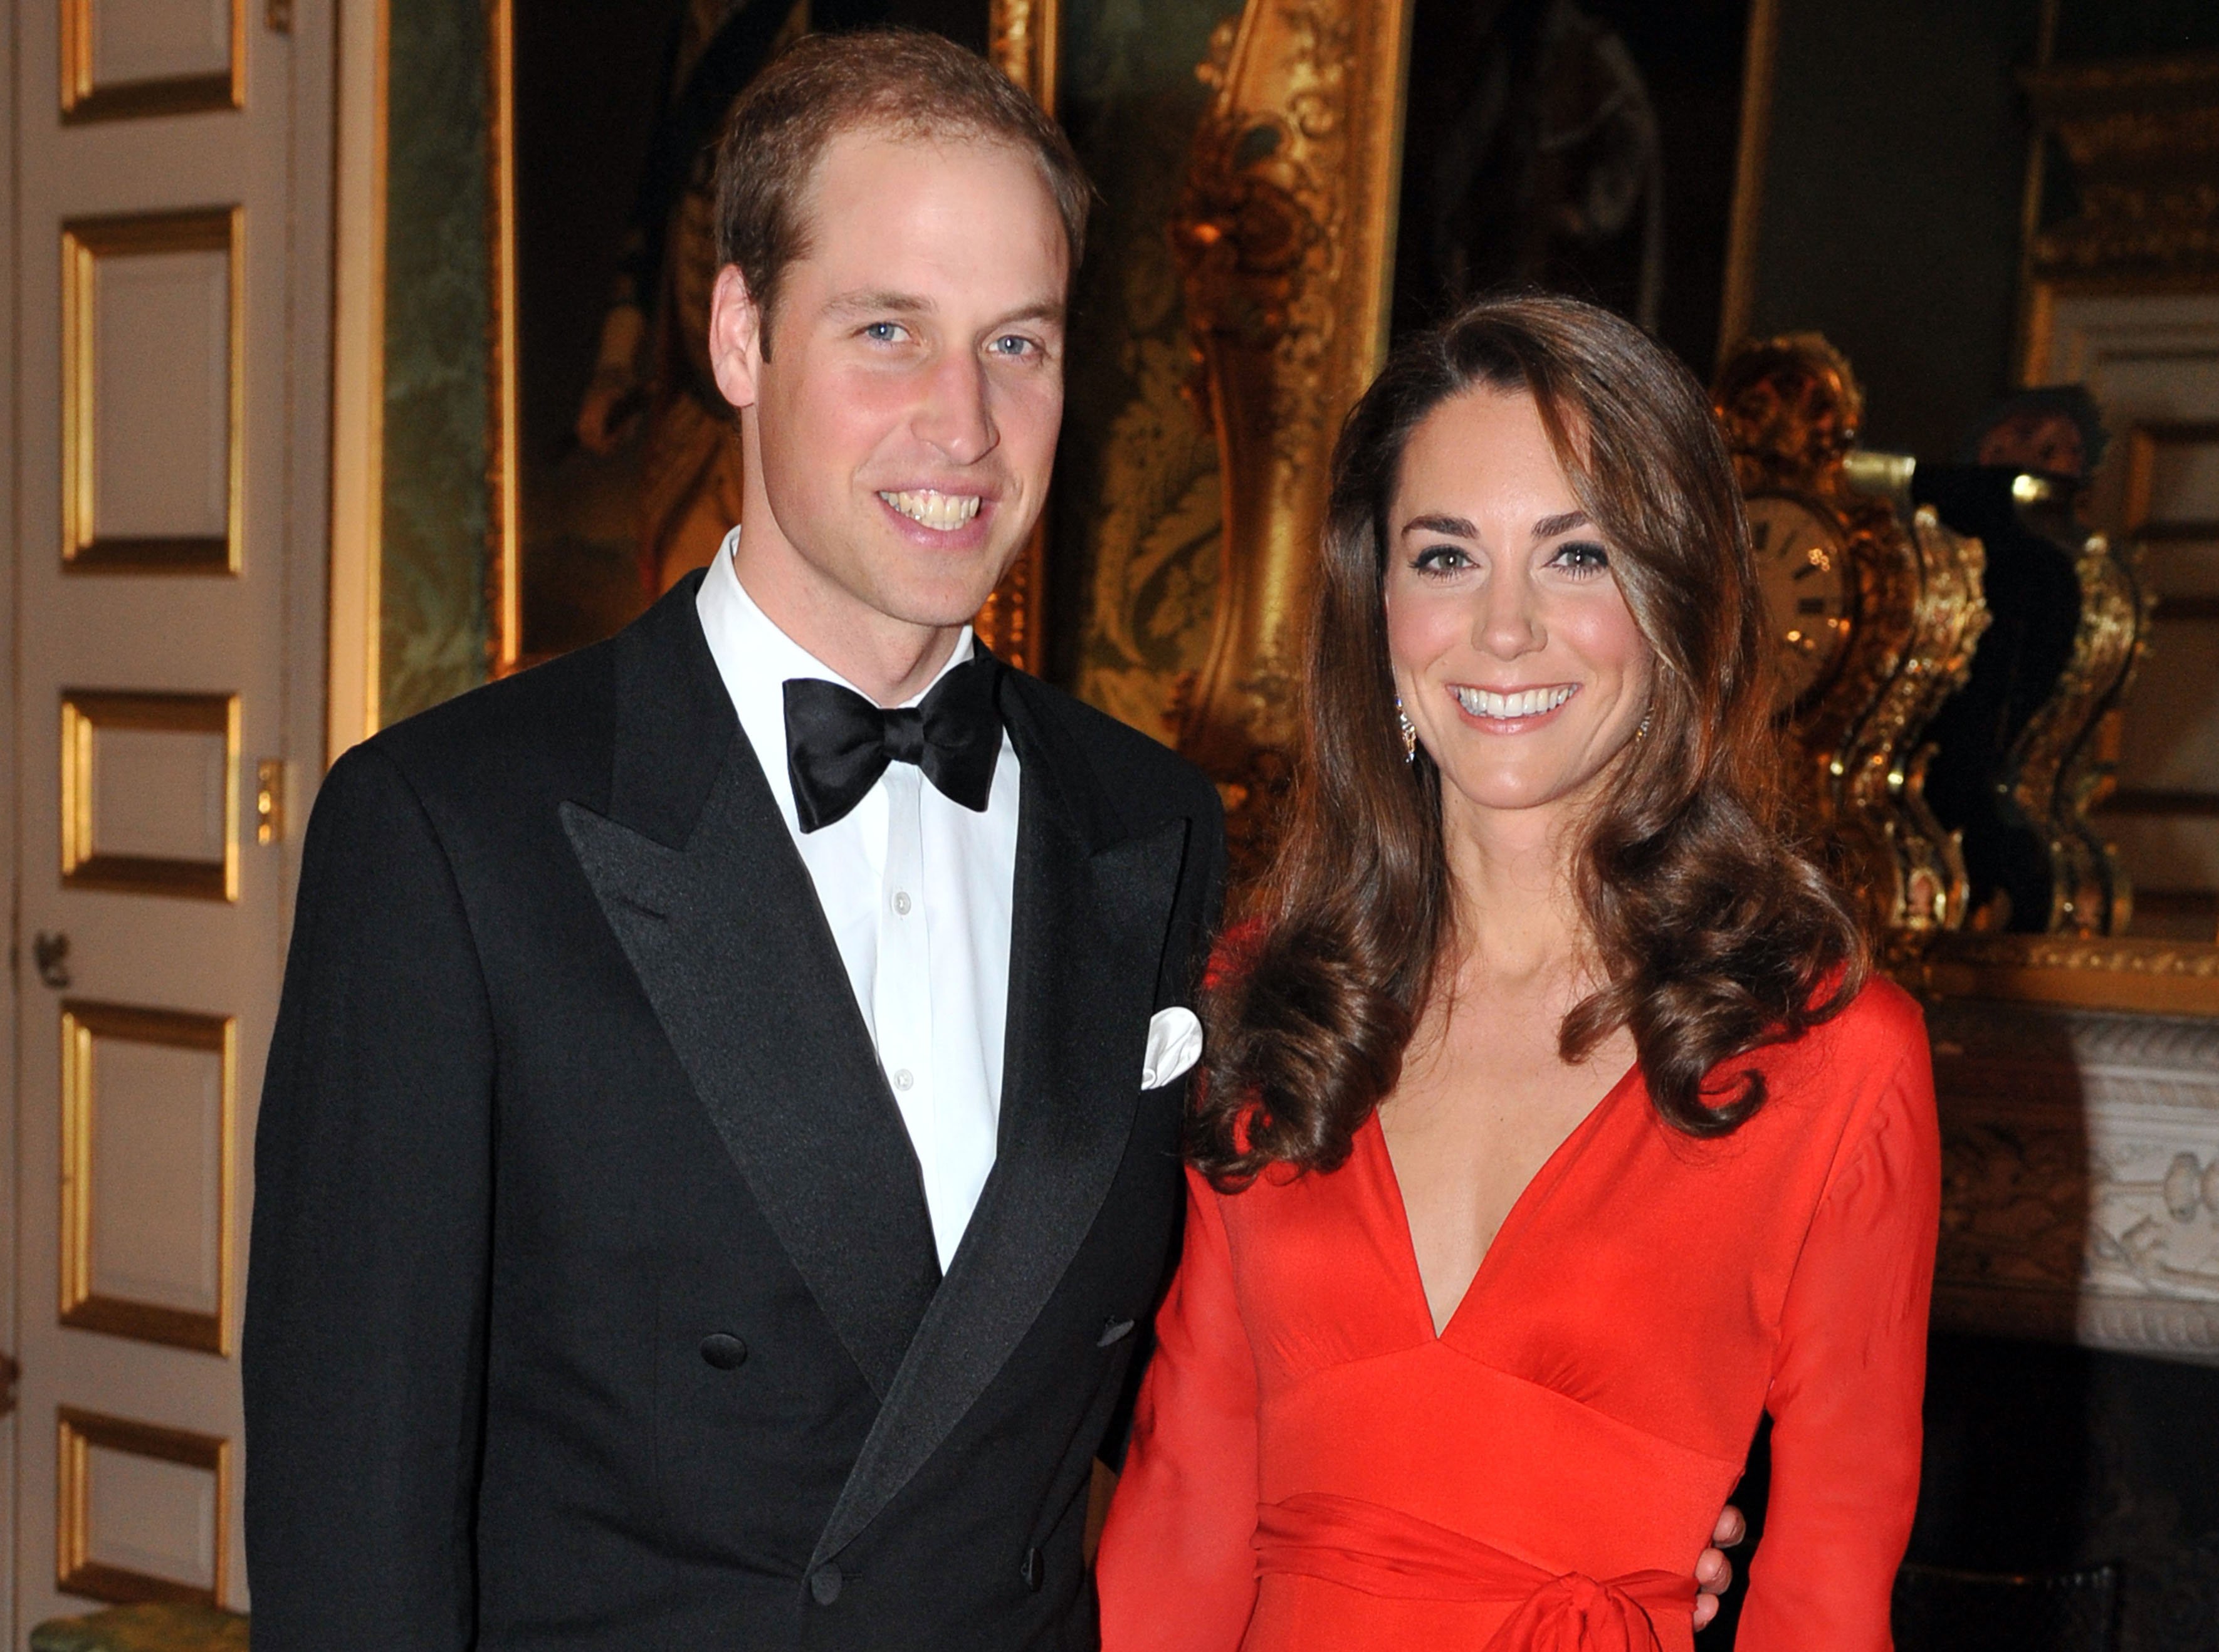 Prince-William-Kate-Middleton-daughter-queen